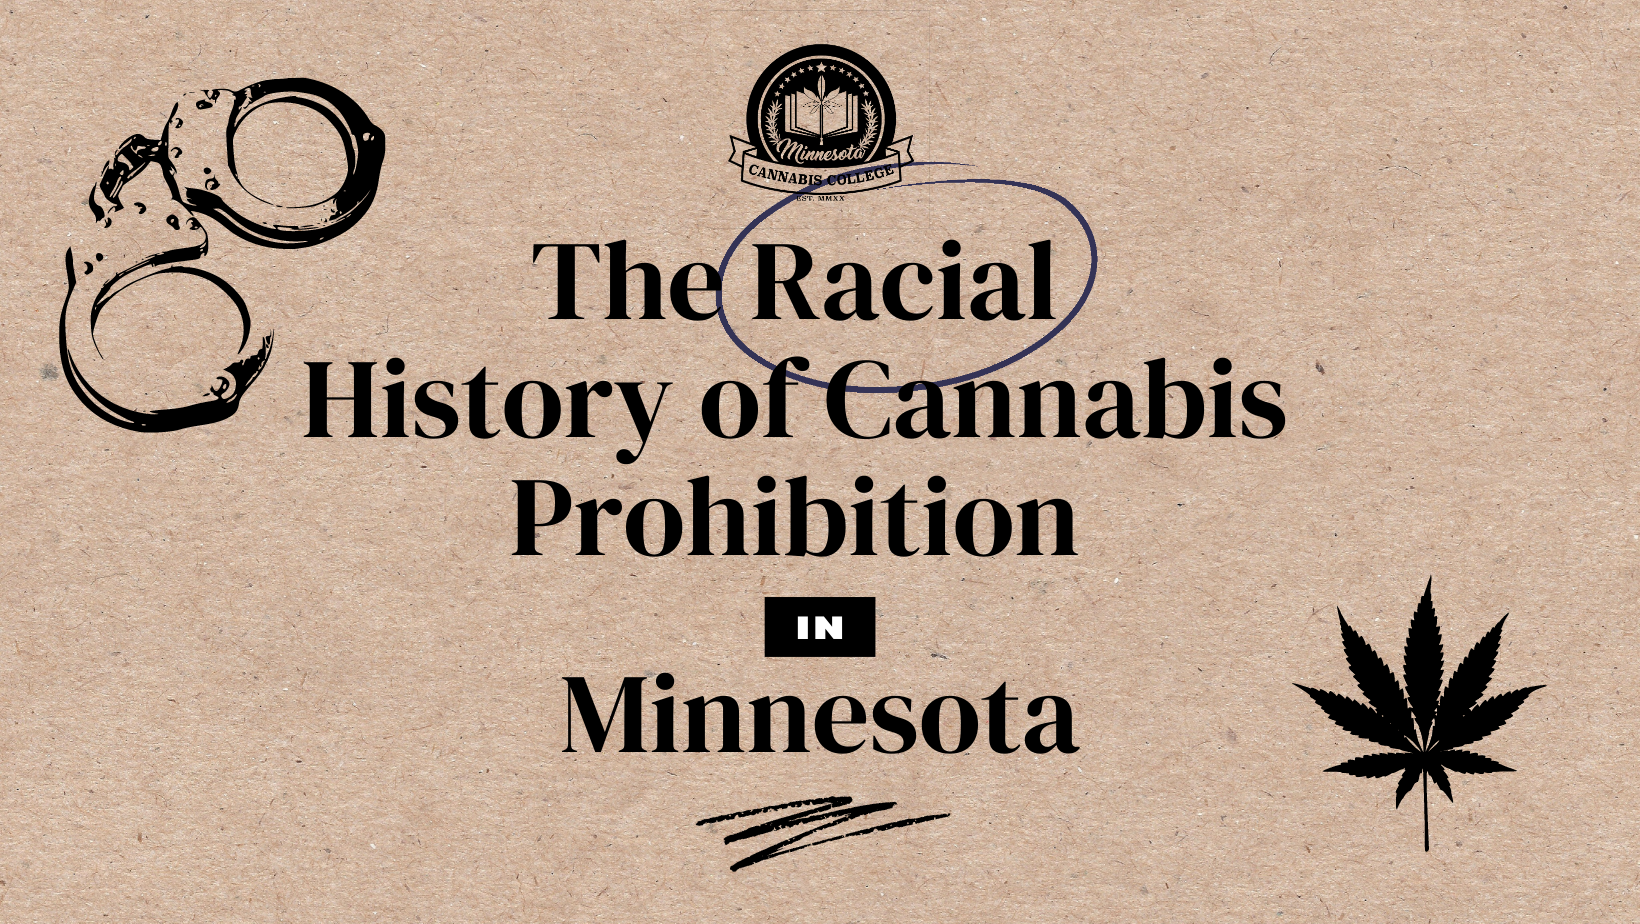 The Racial History of Cannabis Prohibition in Minnesota